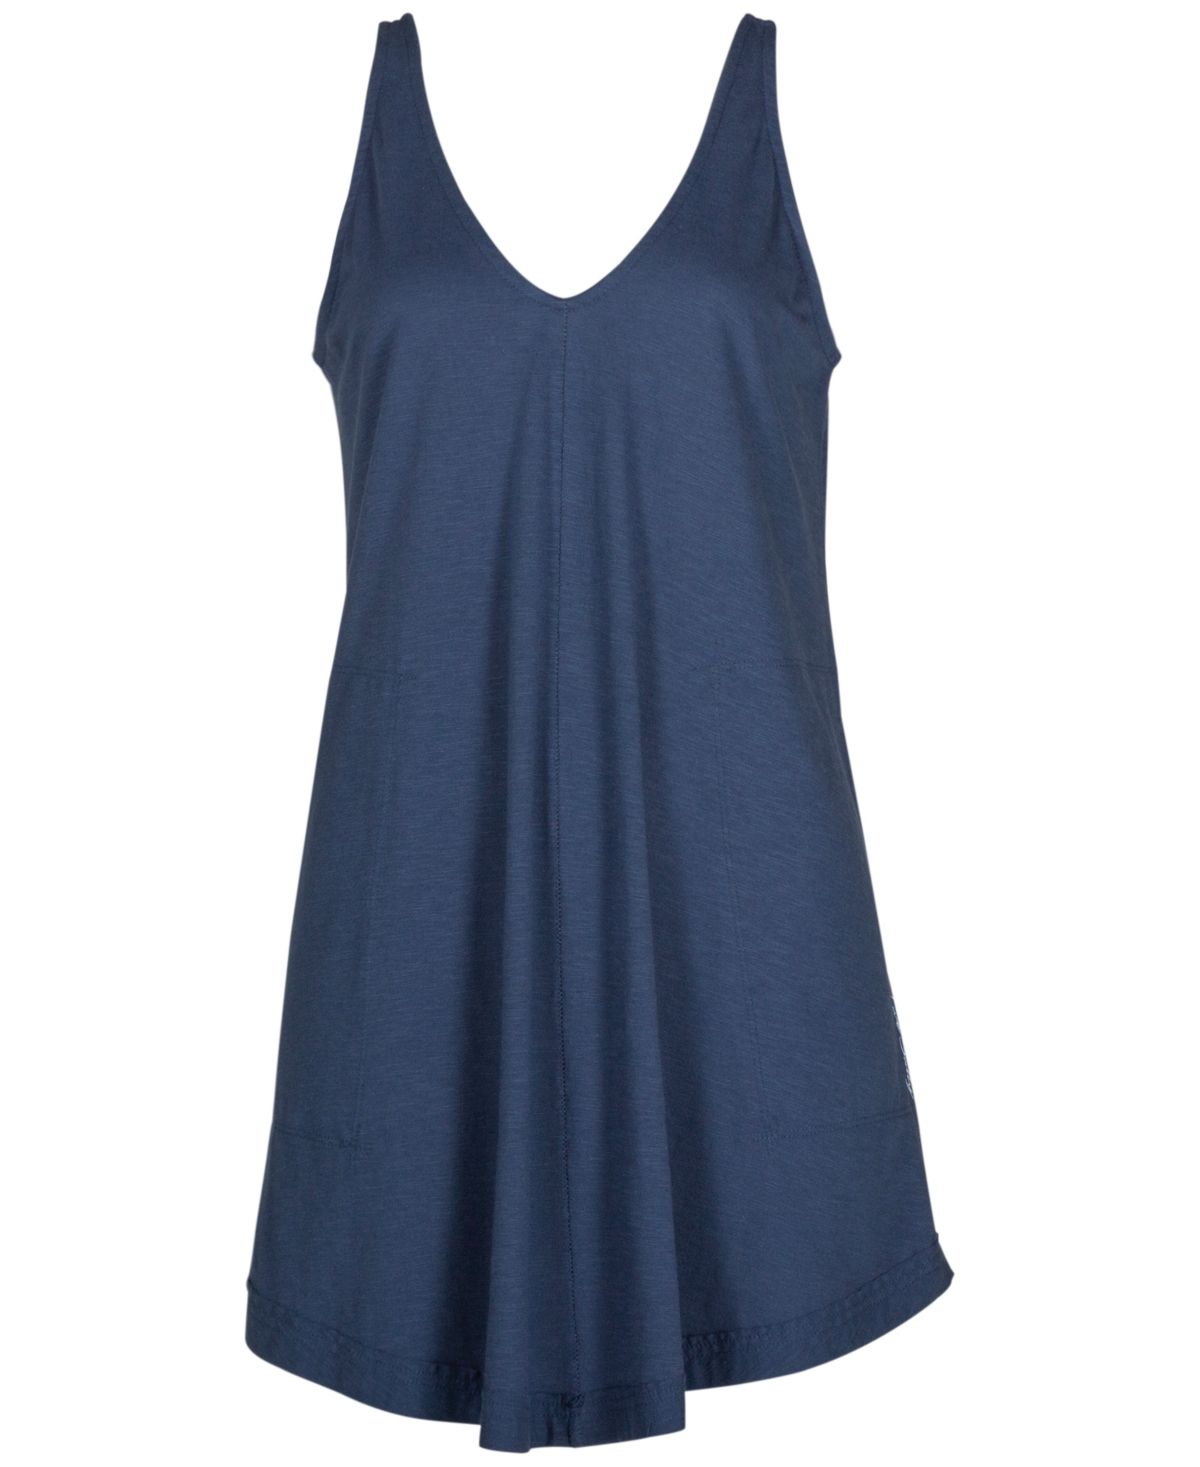 Women's Beach Babe Sleeveless Dress Cover-Up - Washed Navy